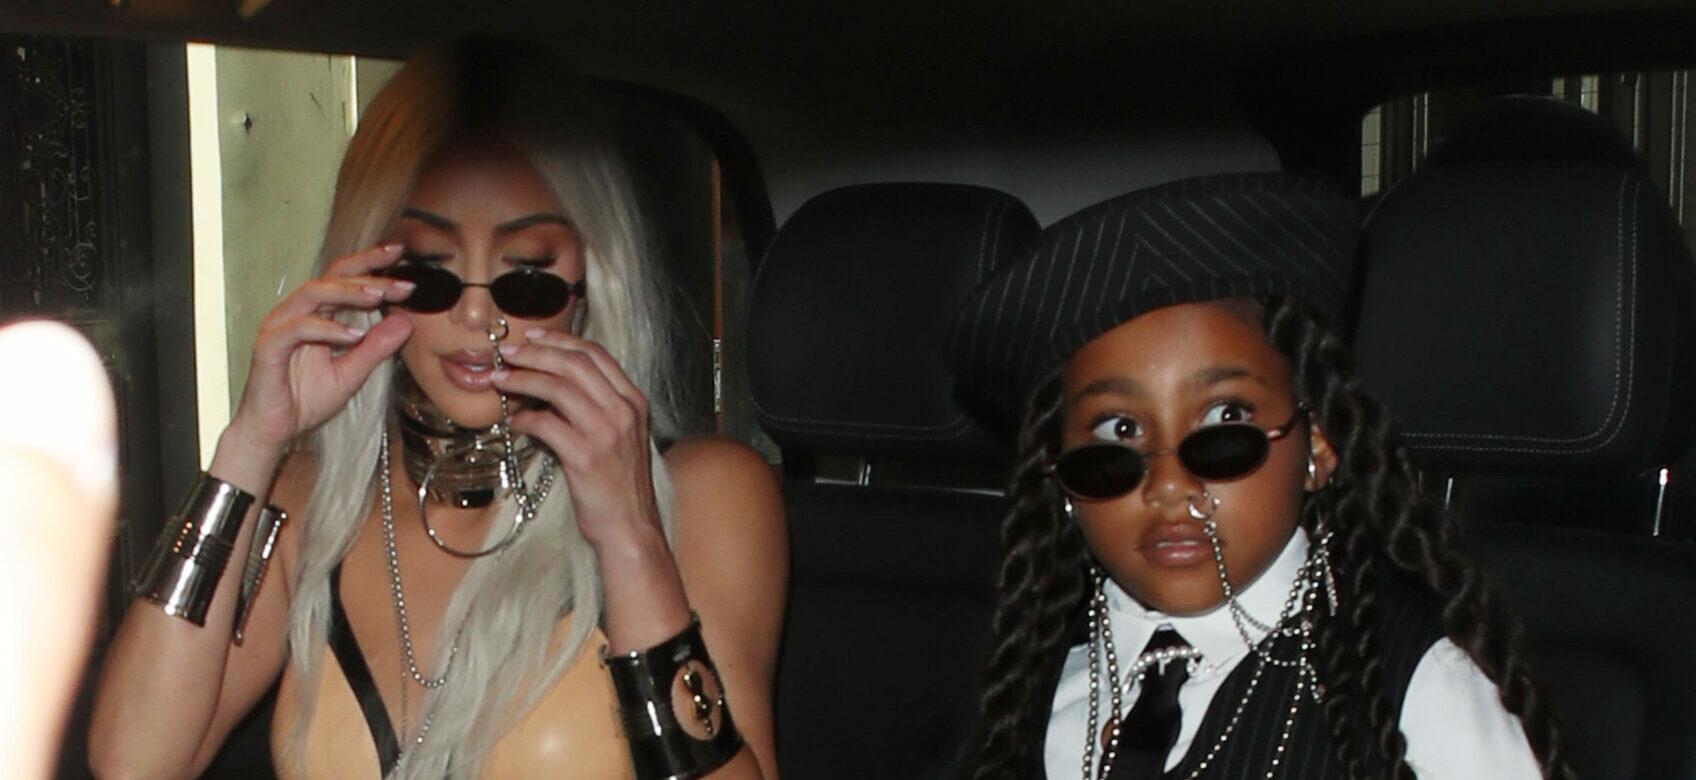 North West Shows Off Her Singing Chops At Lavish Kardashian Christmas Party